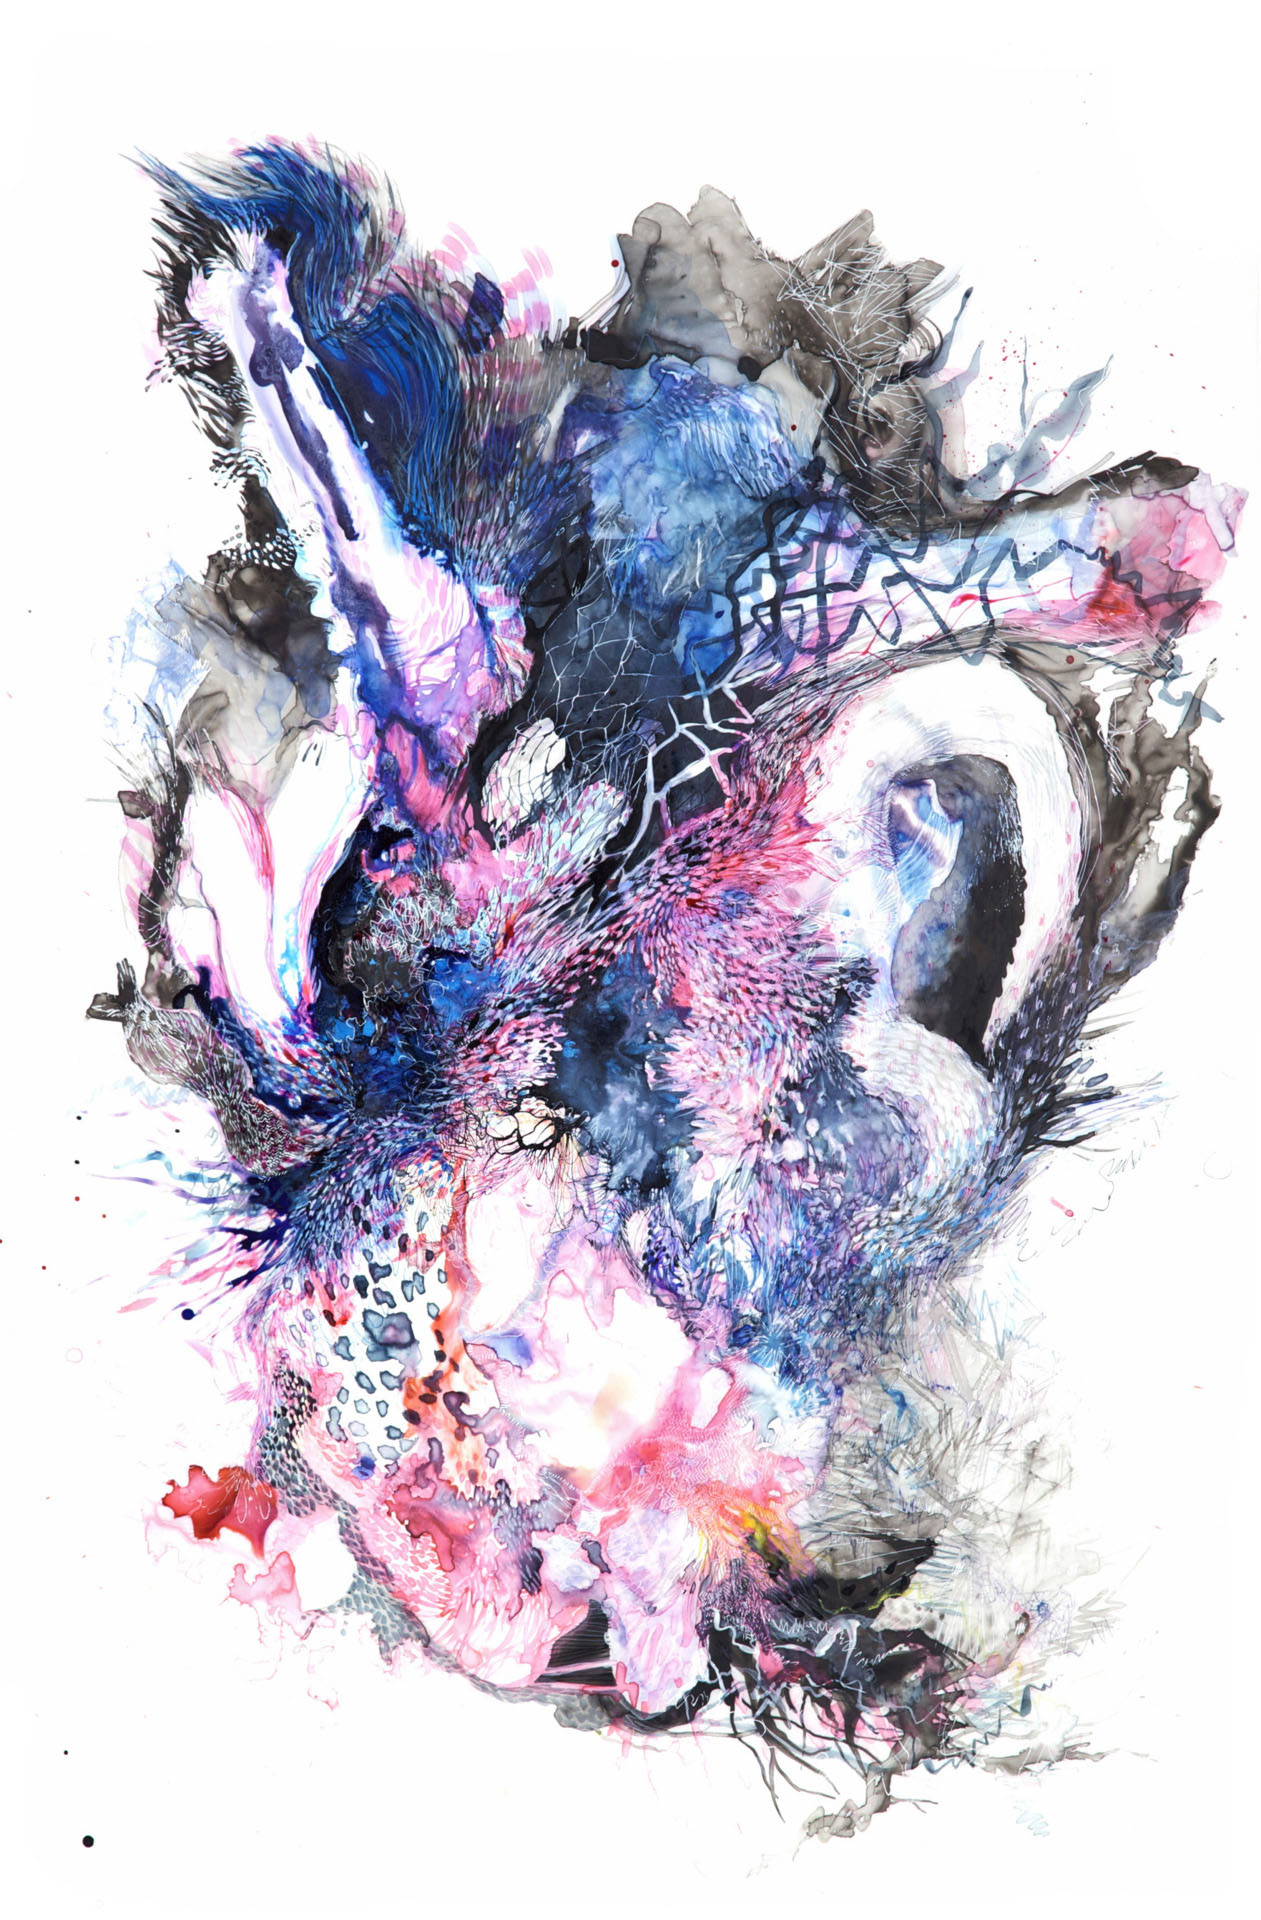  Paola Oxoa  Second Nature 8 , 2010,  Ink, gouache, and graphite on mylar,  36 x 24 in. (91.44 x 60.96 cm) 